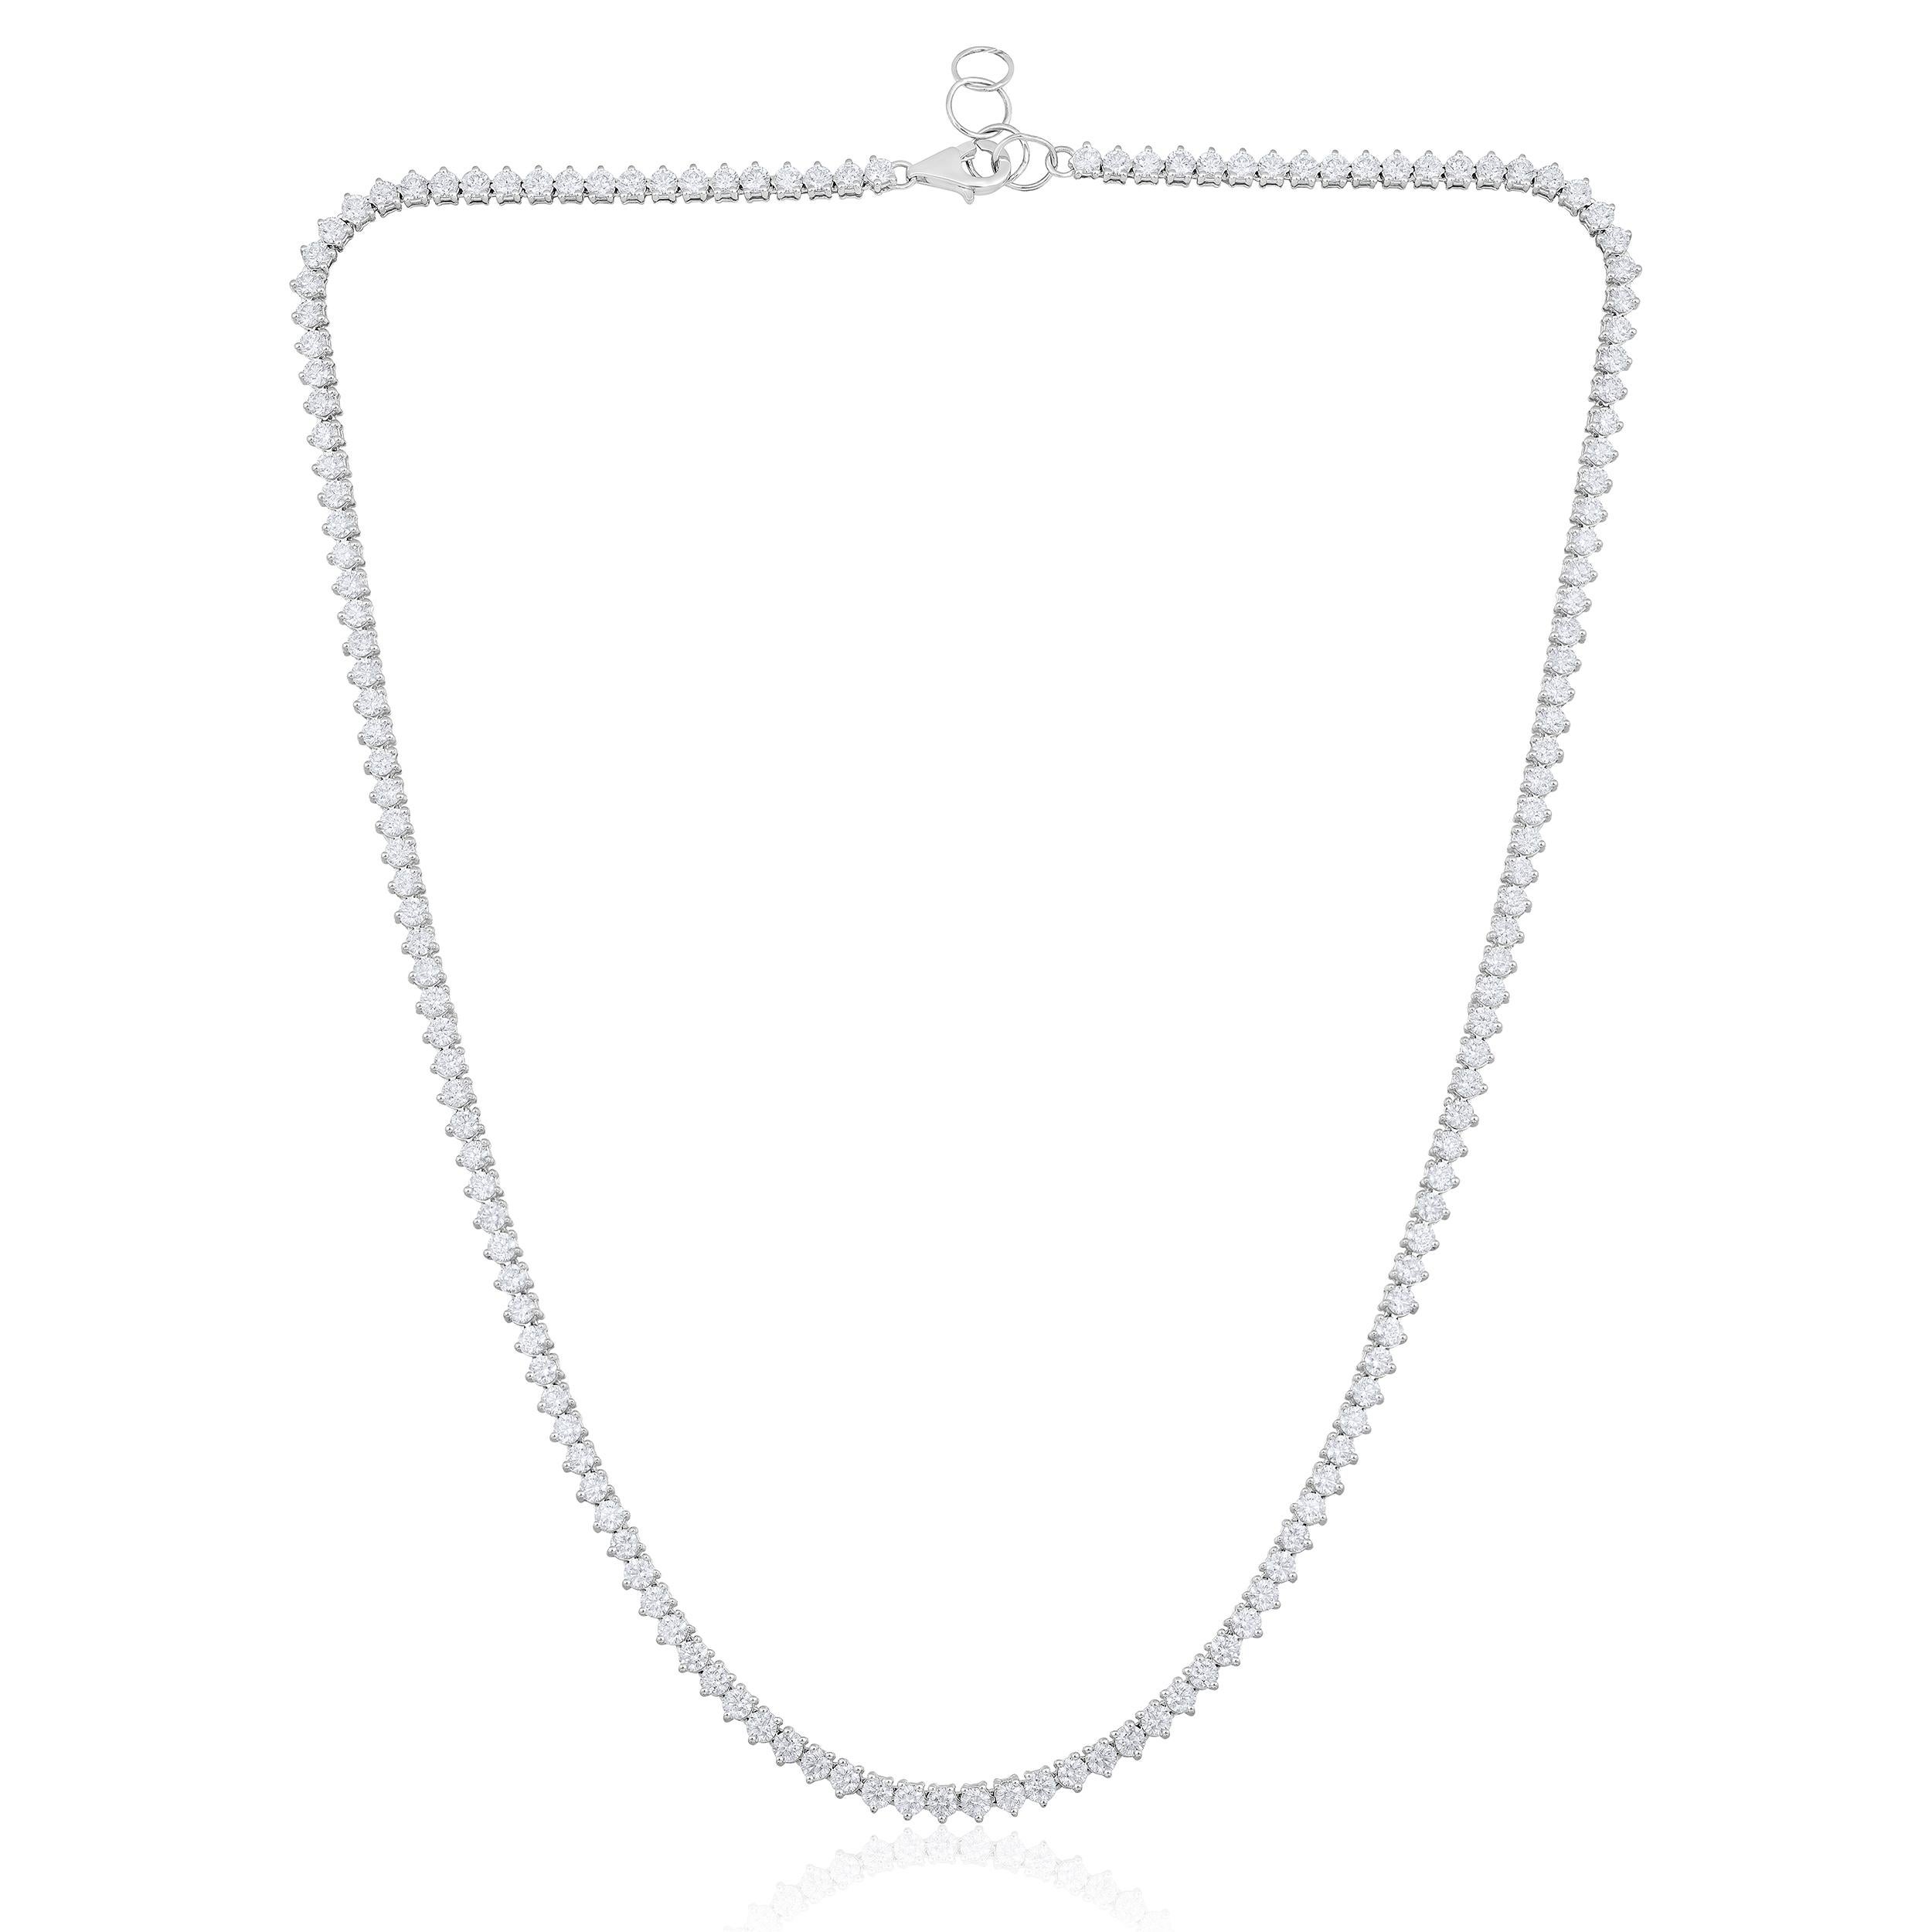 Crafted in 14.17 grams of 14K White Gold, the necklace contains 150 stones of Round Diamonds with a total of 8.35 carat in G-H color and VS-SI carat. The necklace length is 18 inches.

CONTEMPORARY AND TIMELESS ESSENCE: Crafted in 14-karat/18-karat